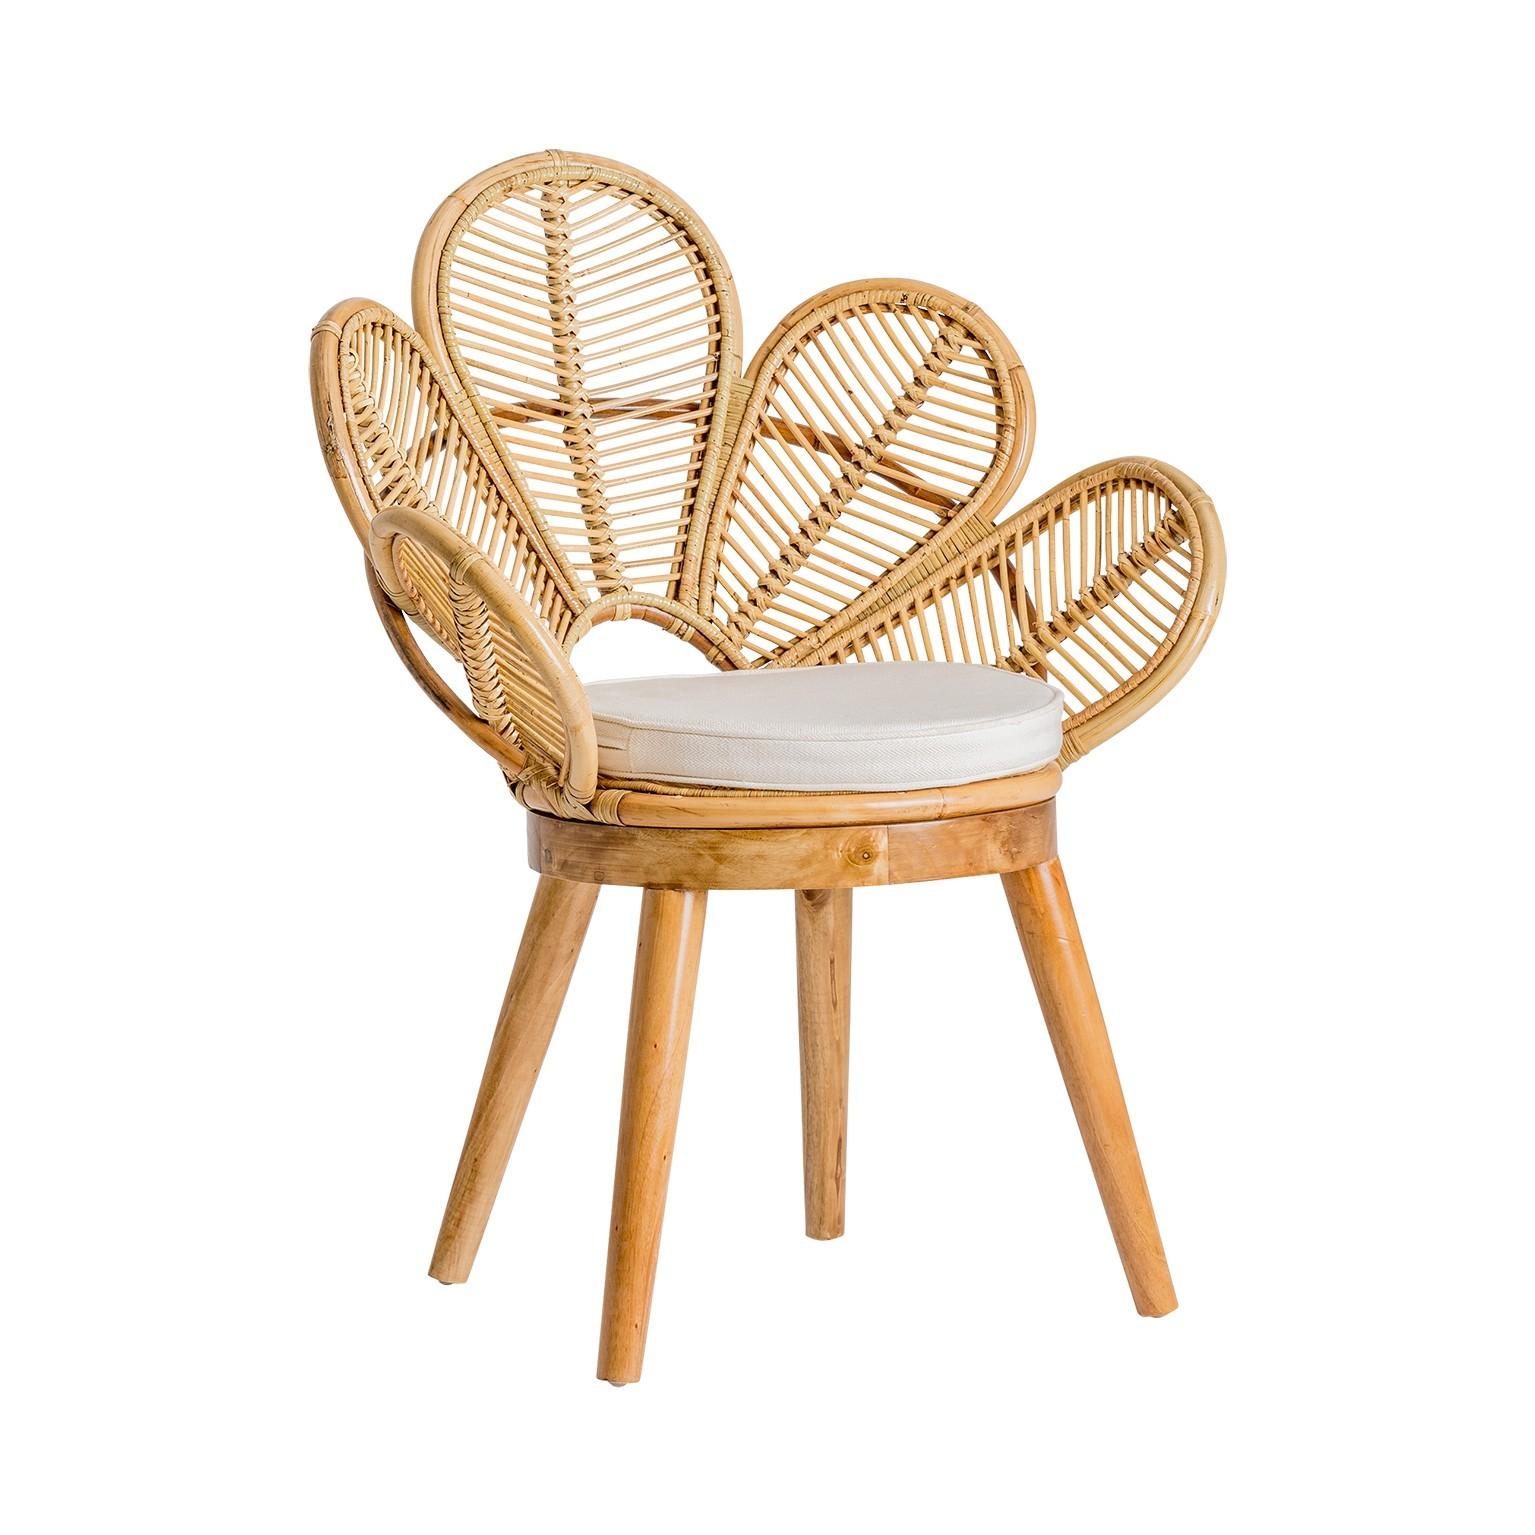 Pair of rattan and wooden armchairs: flower petal shaped seats, on wooden feets. They will be perfect on your terrace, in your veranda, around the swimming pool or the dining table. Poetic, elegant, aerial and colourful. All in excellent state